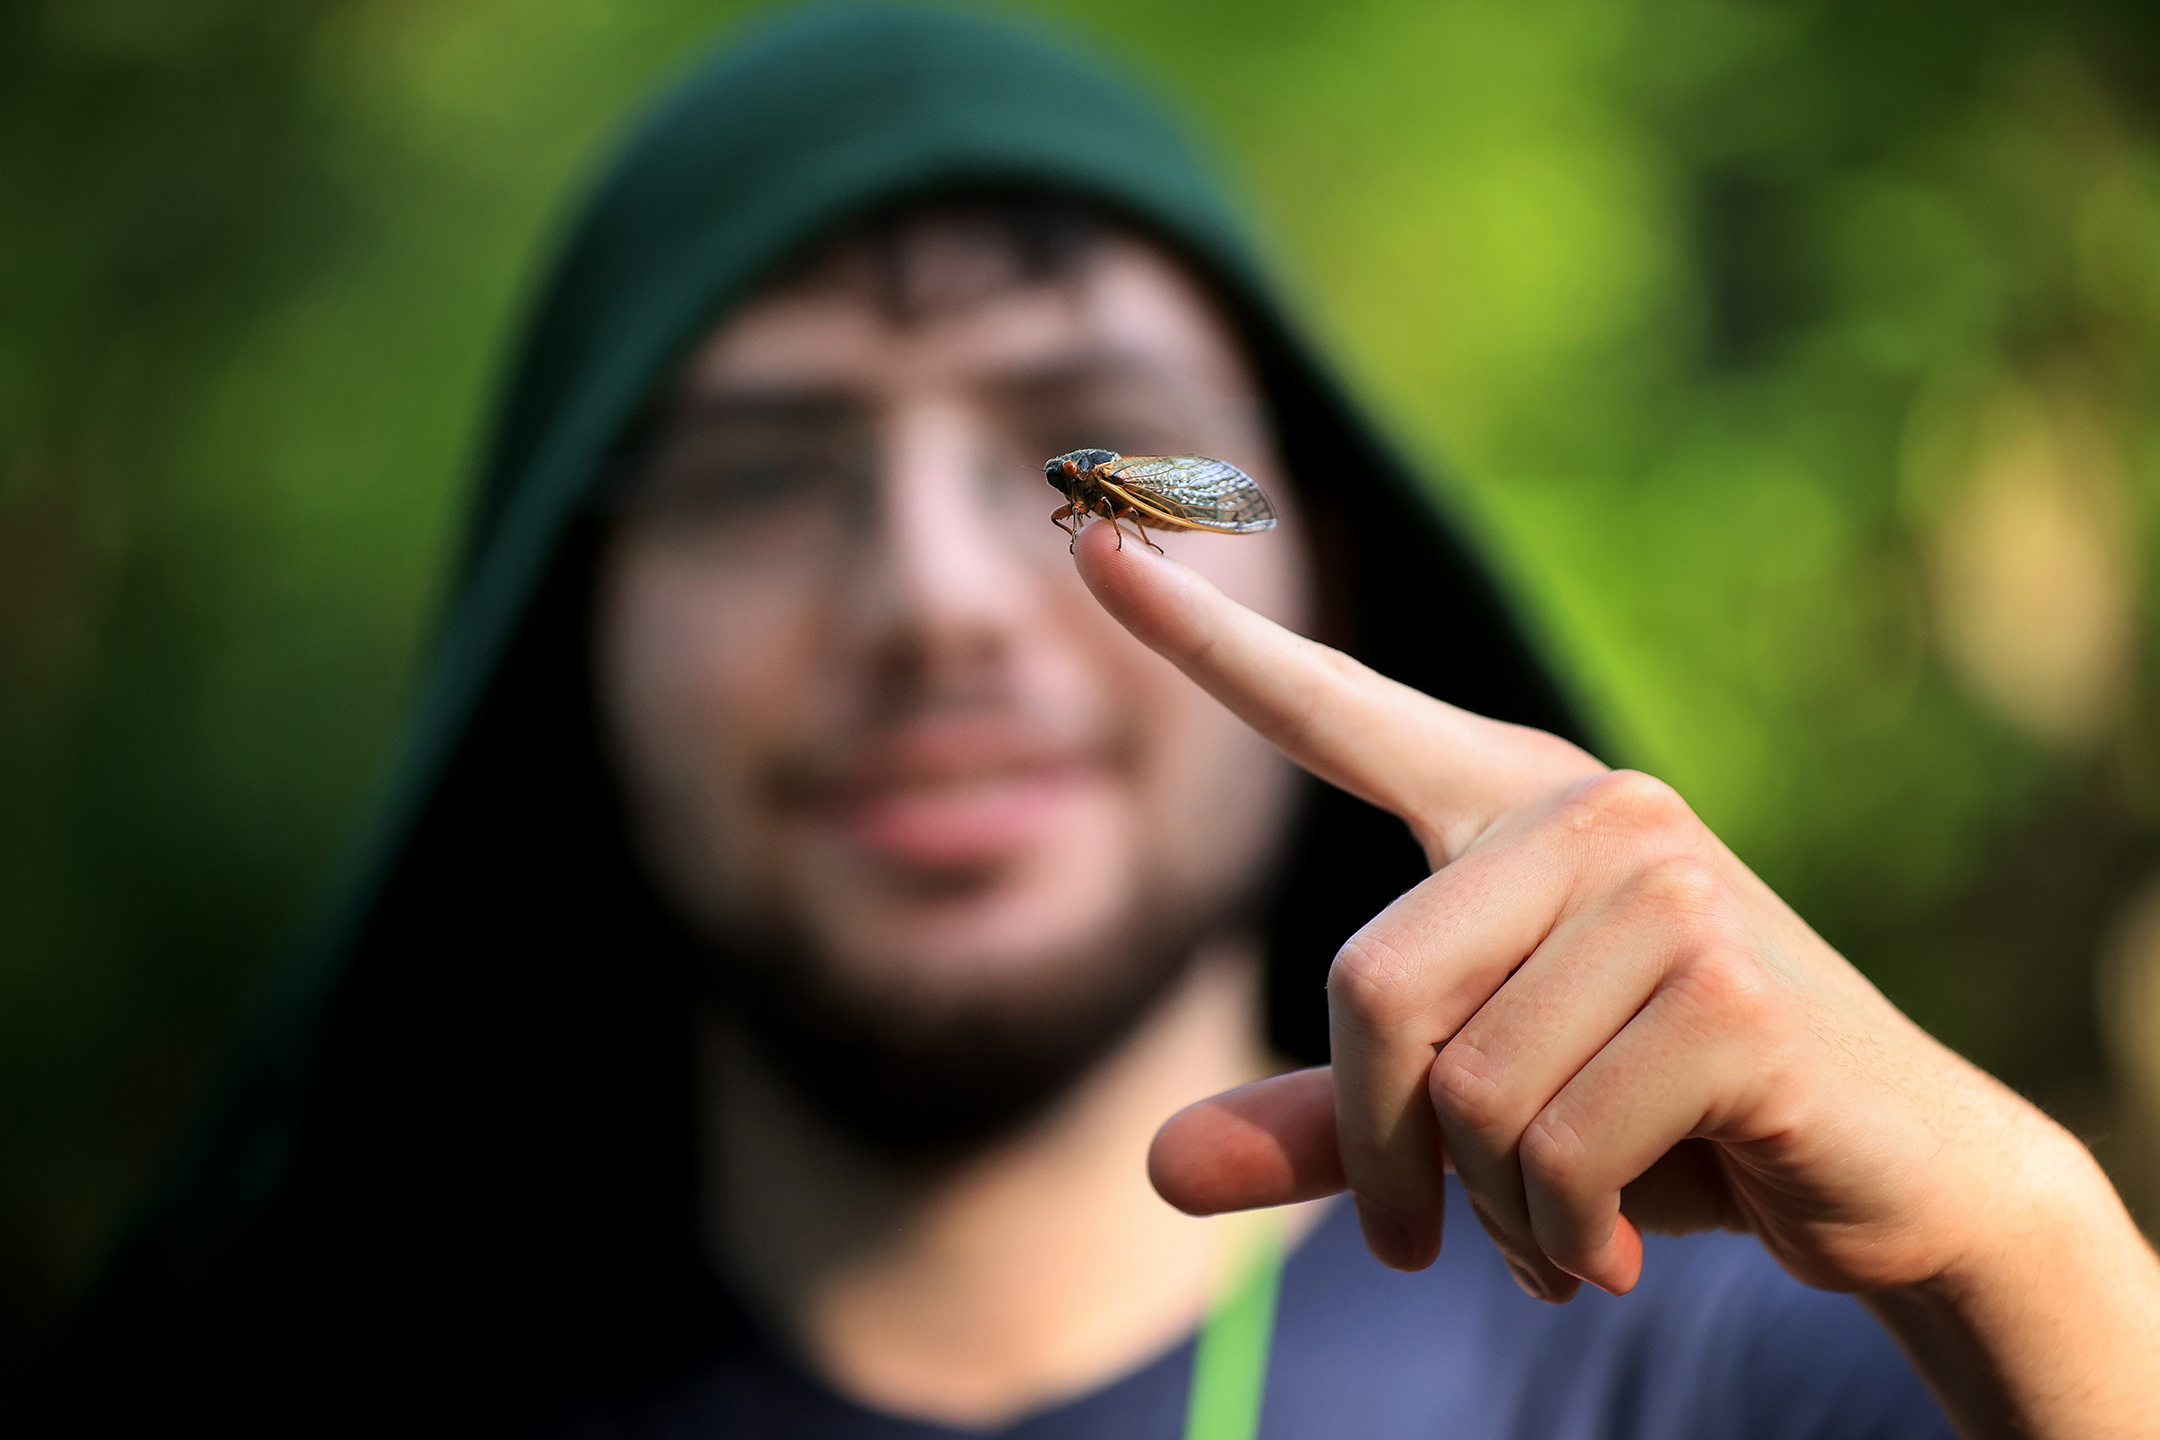 Photo of a cicada perched on a man's finger, with the man in the background smiling and out of focus